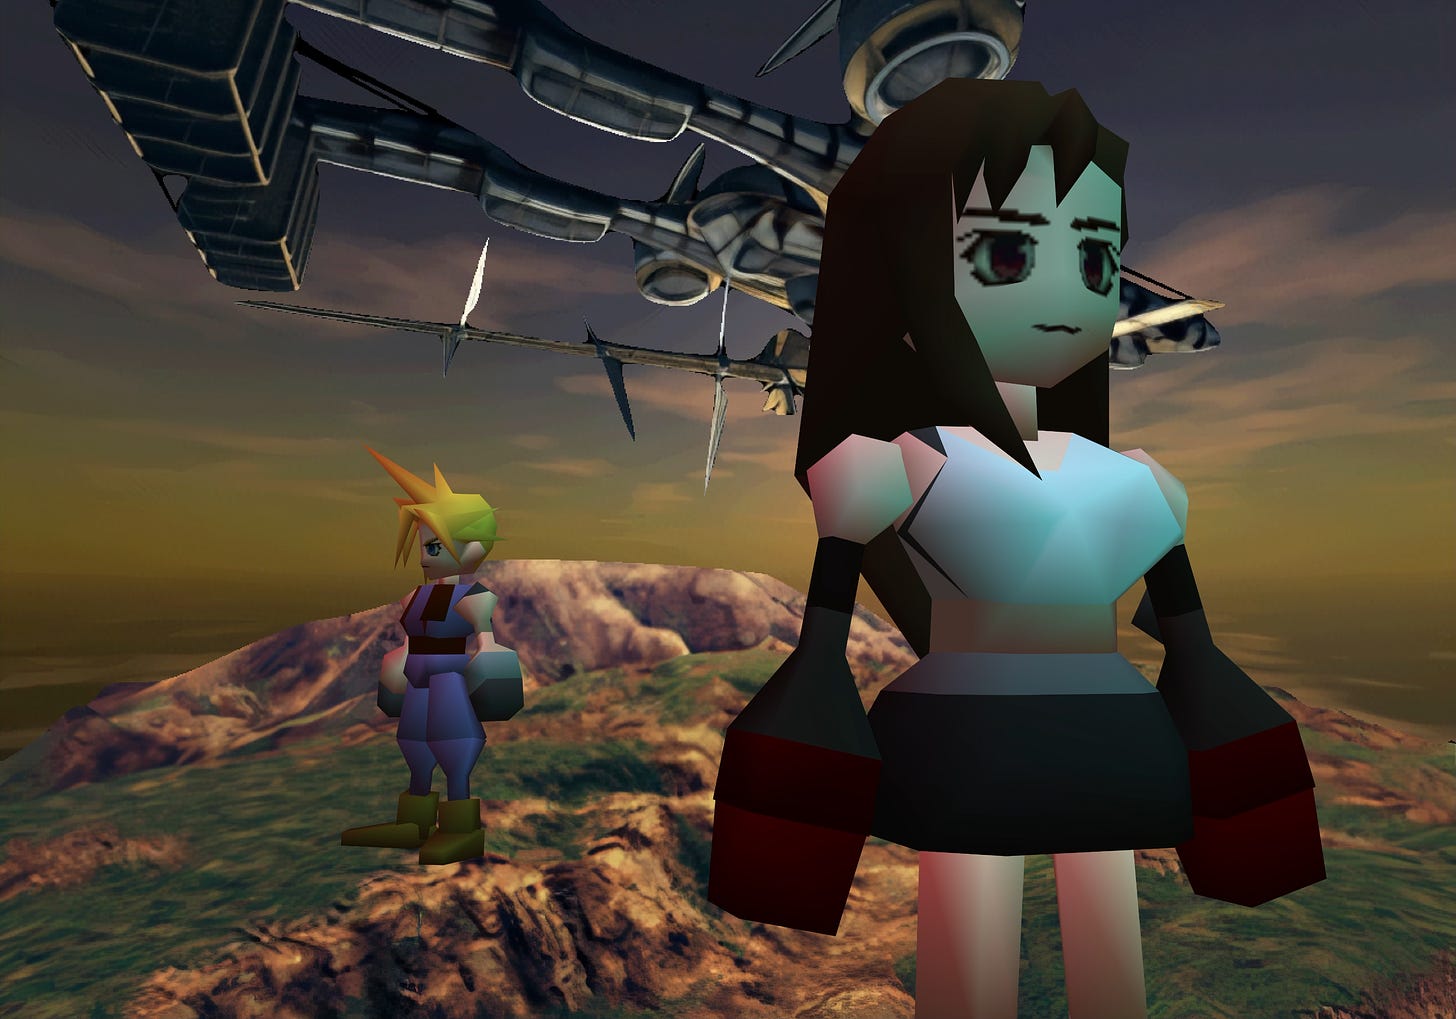 Cloud and Tifa spend some quality time underneath the Highwind before the final confrontation with Sephiroth.